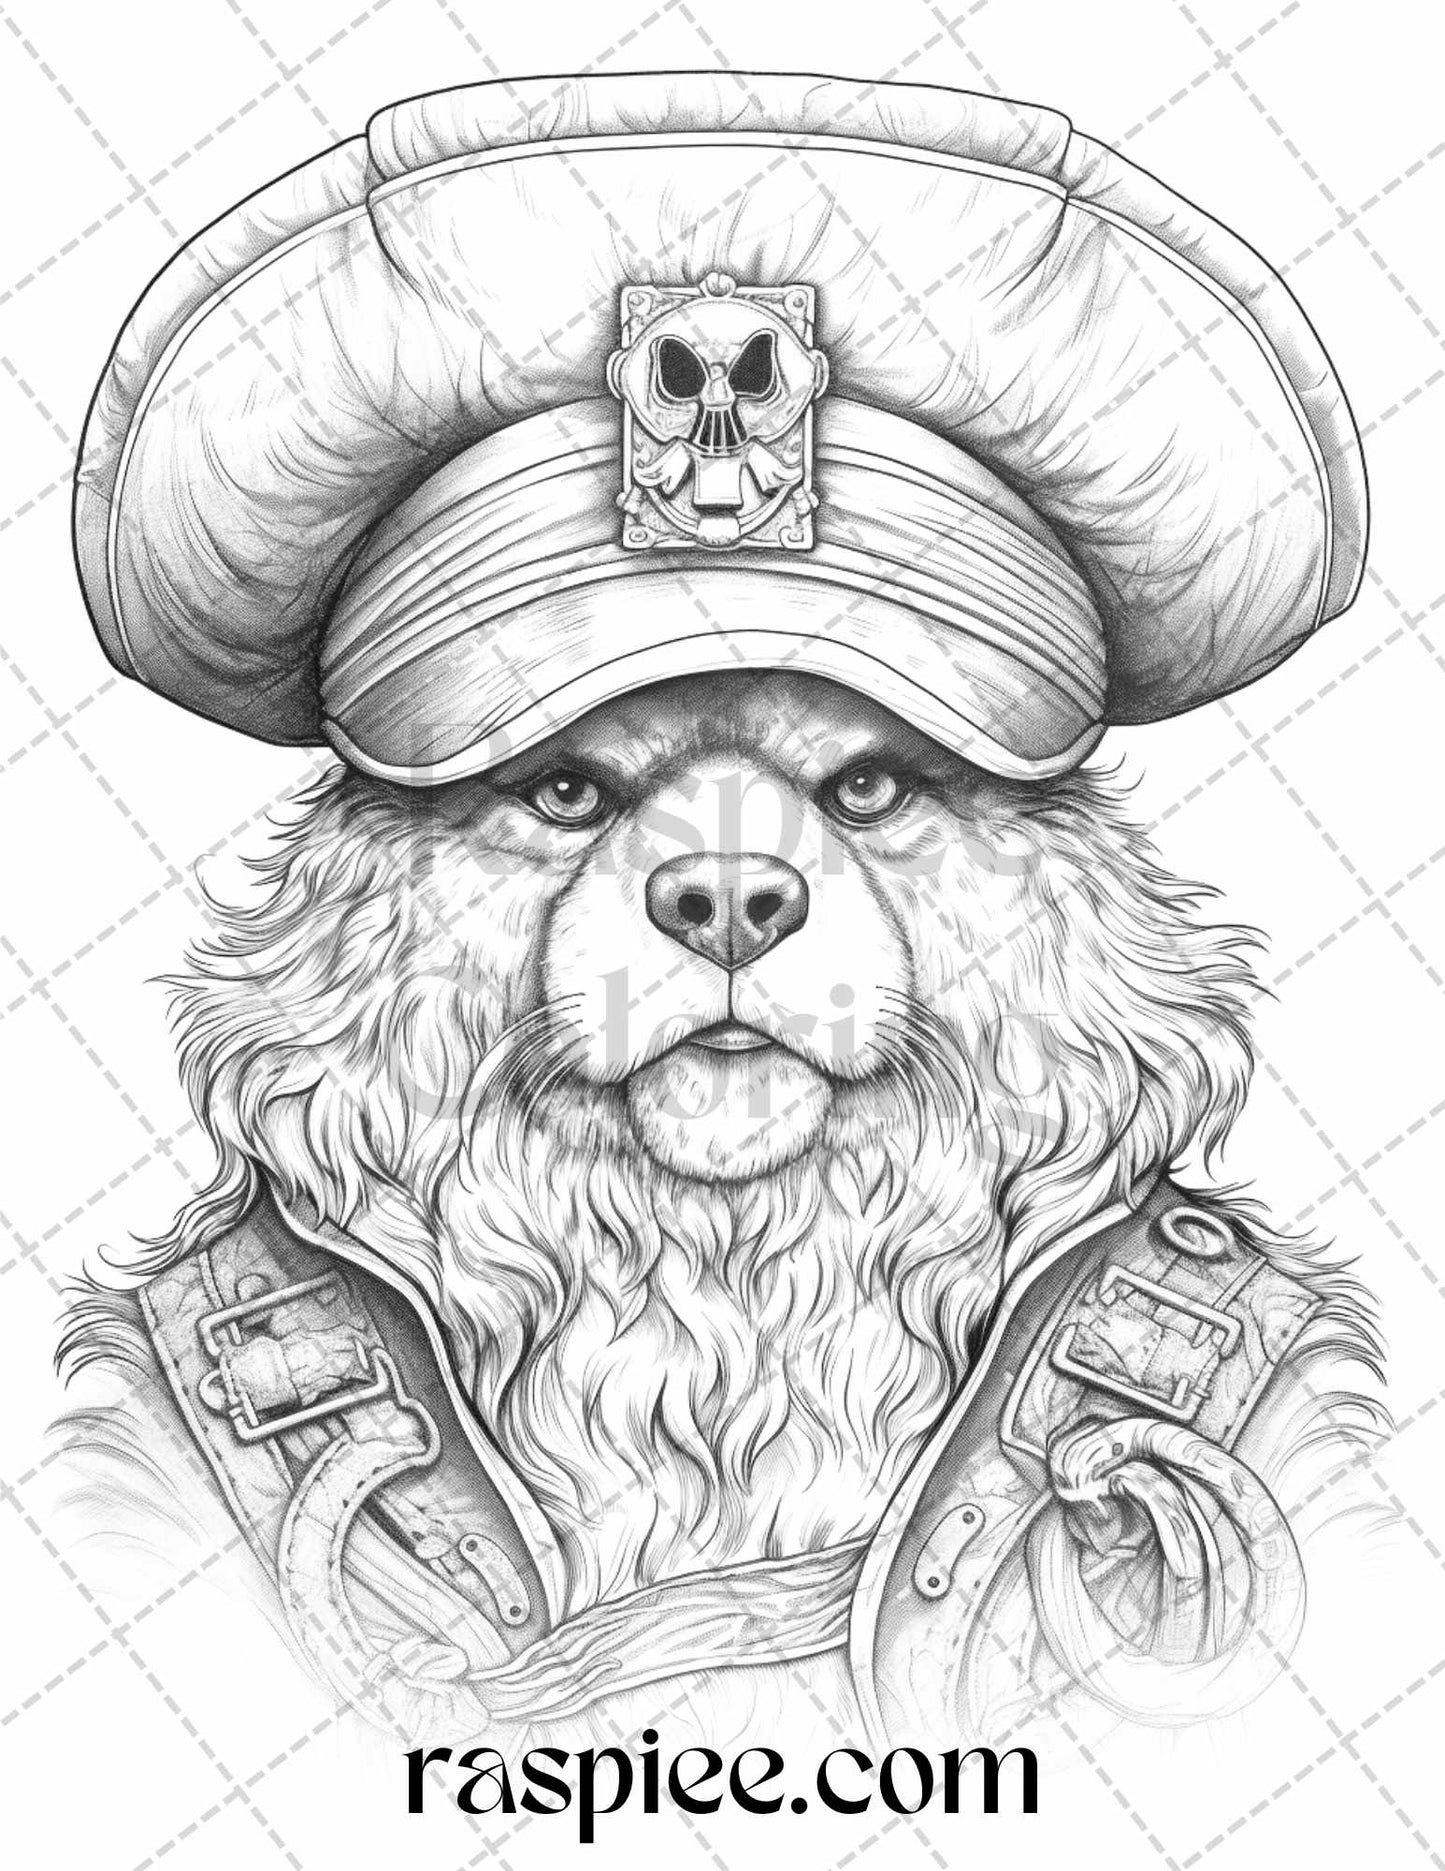 Pirate Animals Grayscale Coloring Page Printable Coloring Pages for Adults, Pirate Theme Coloring Book Page, Printable Animal Illustration, Animal Coloring Pages for Adults